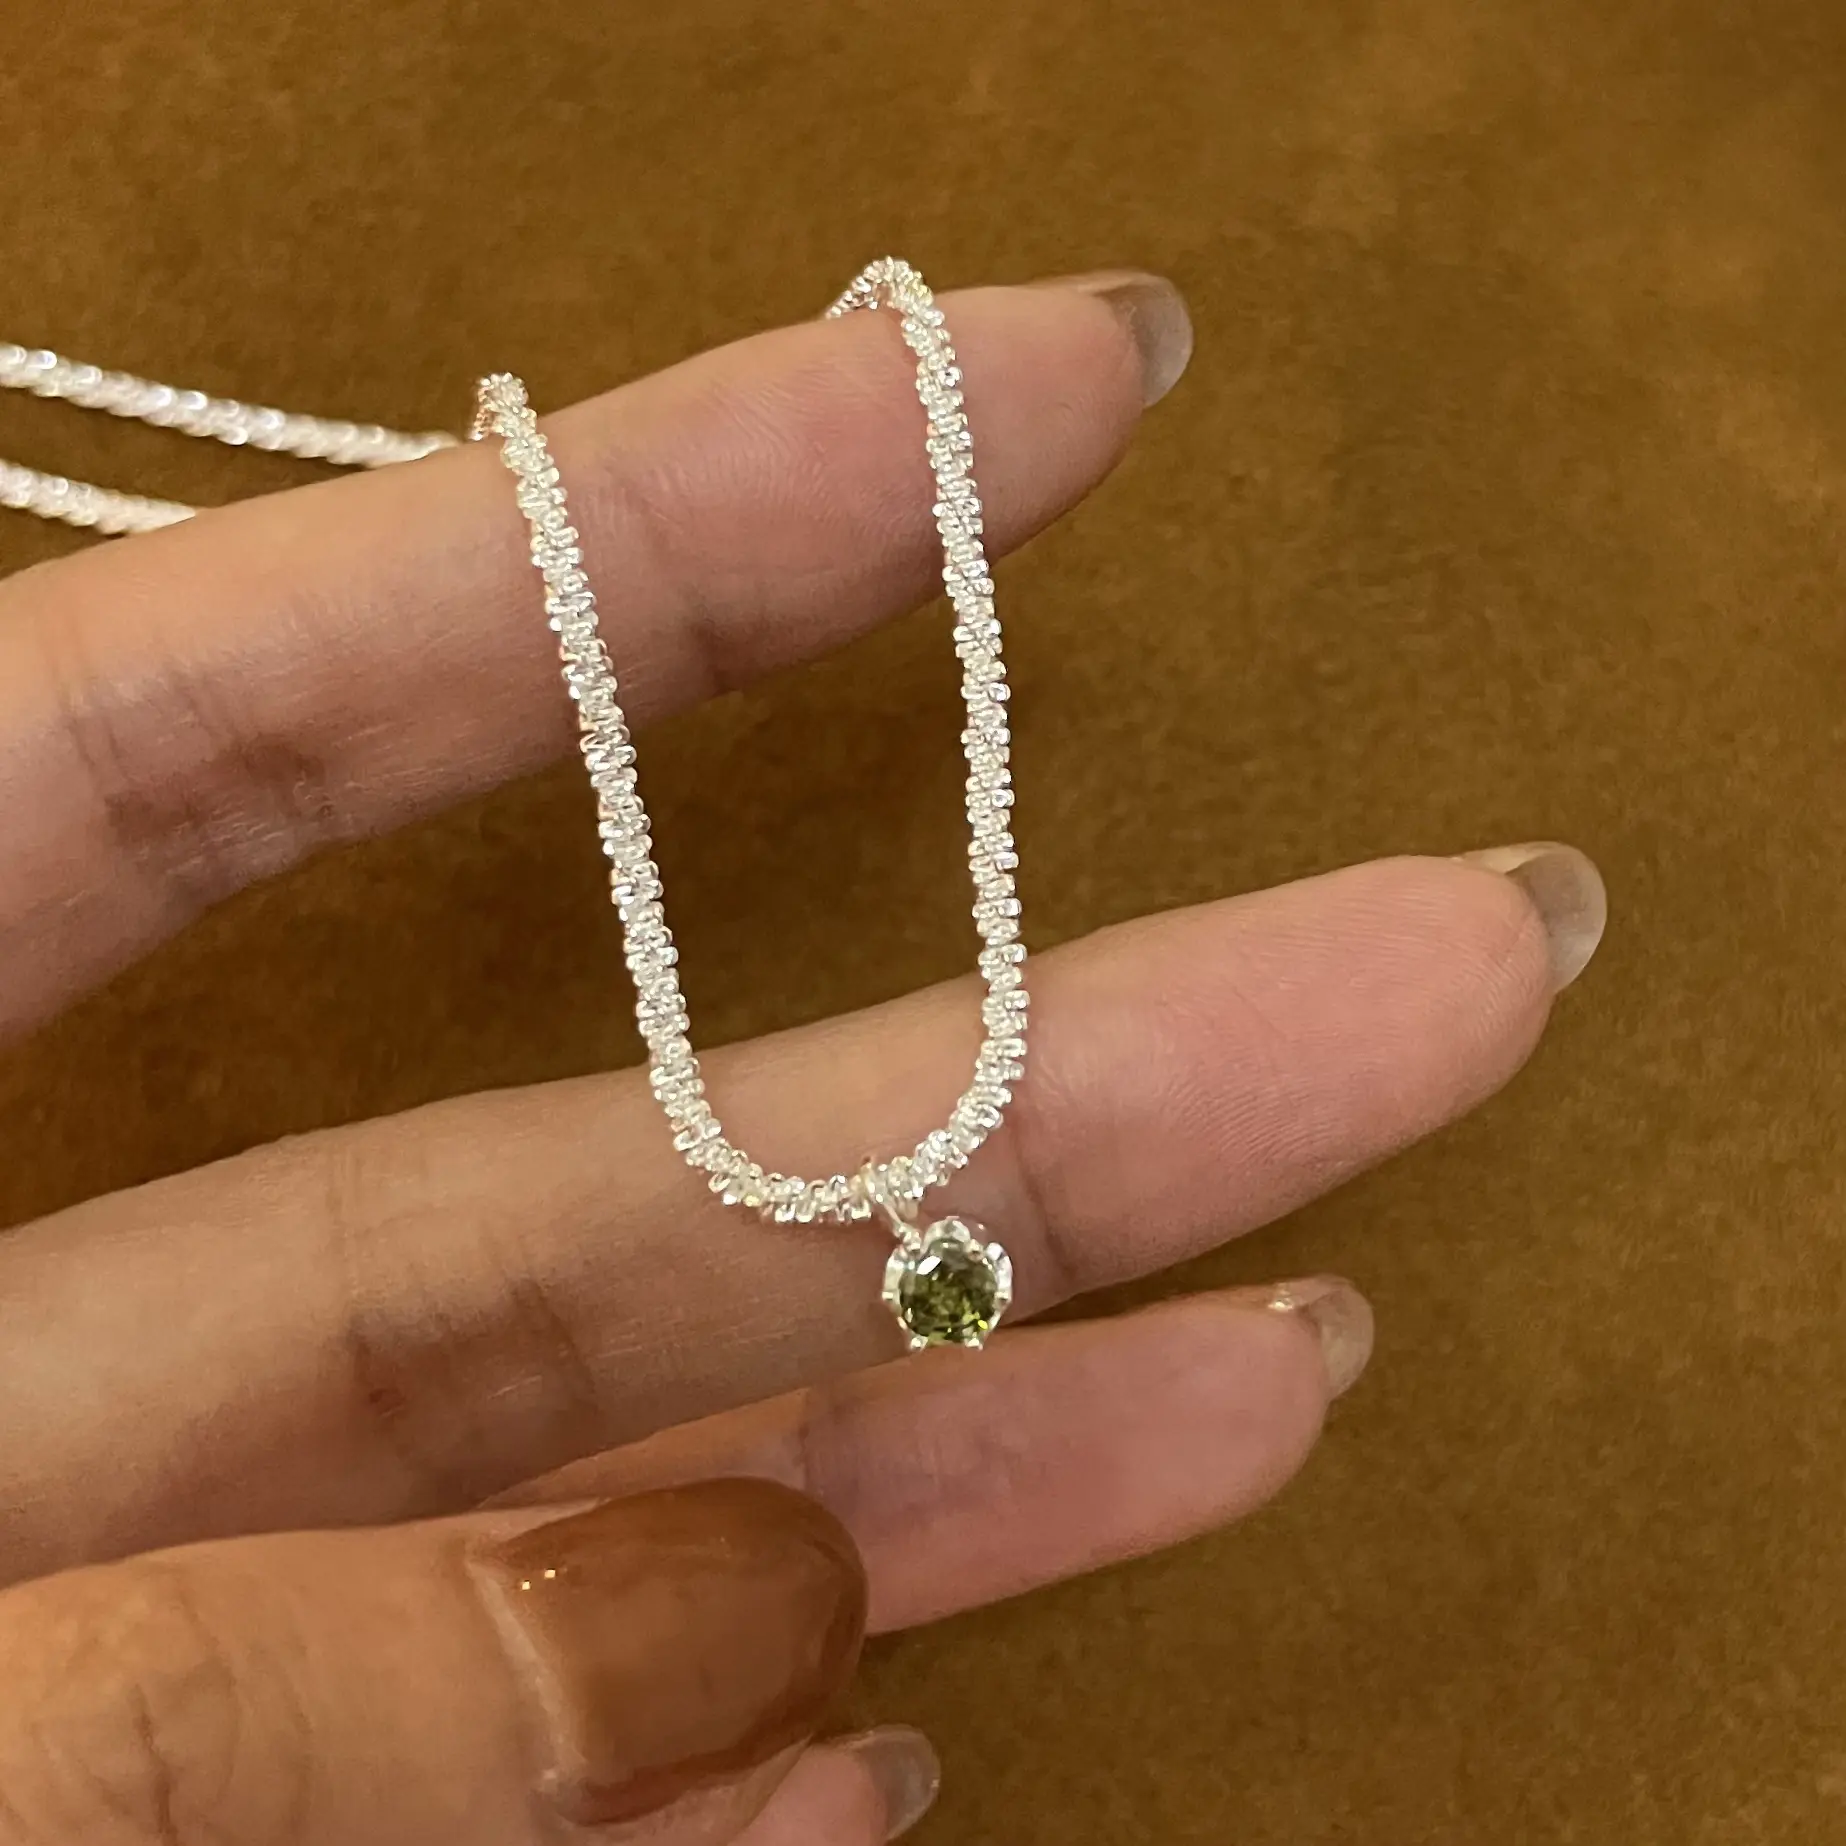 Vintage Luxury Sparkling Simple Crystal Necklace Trendy Green Diamond Pendant Clavicle Chain Necklace For Women And Girls